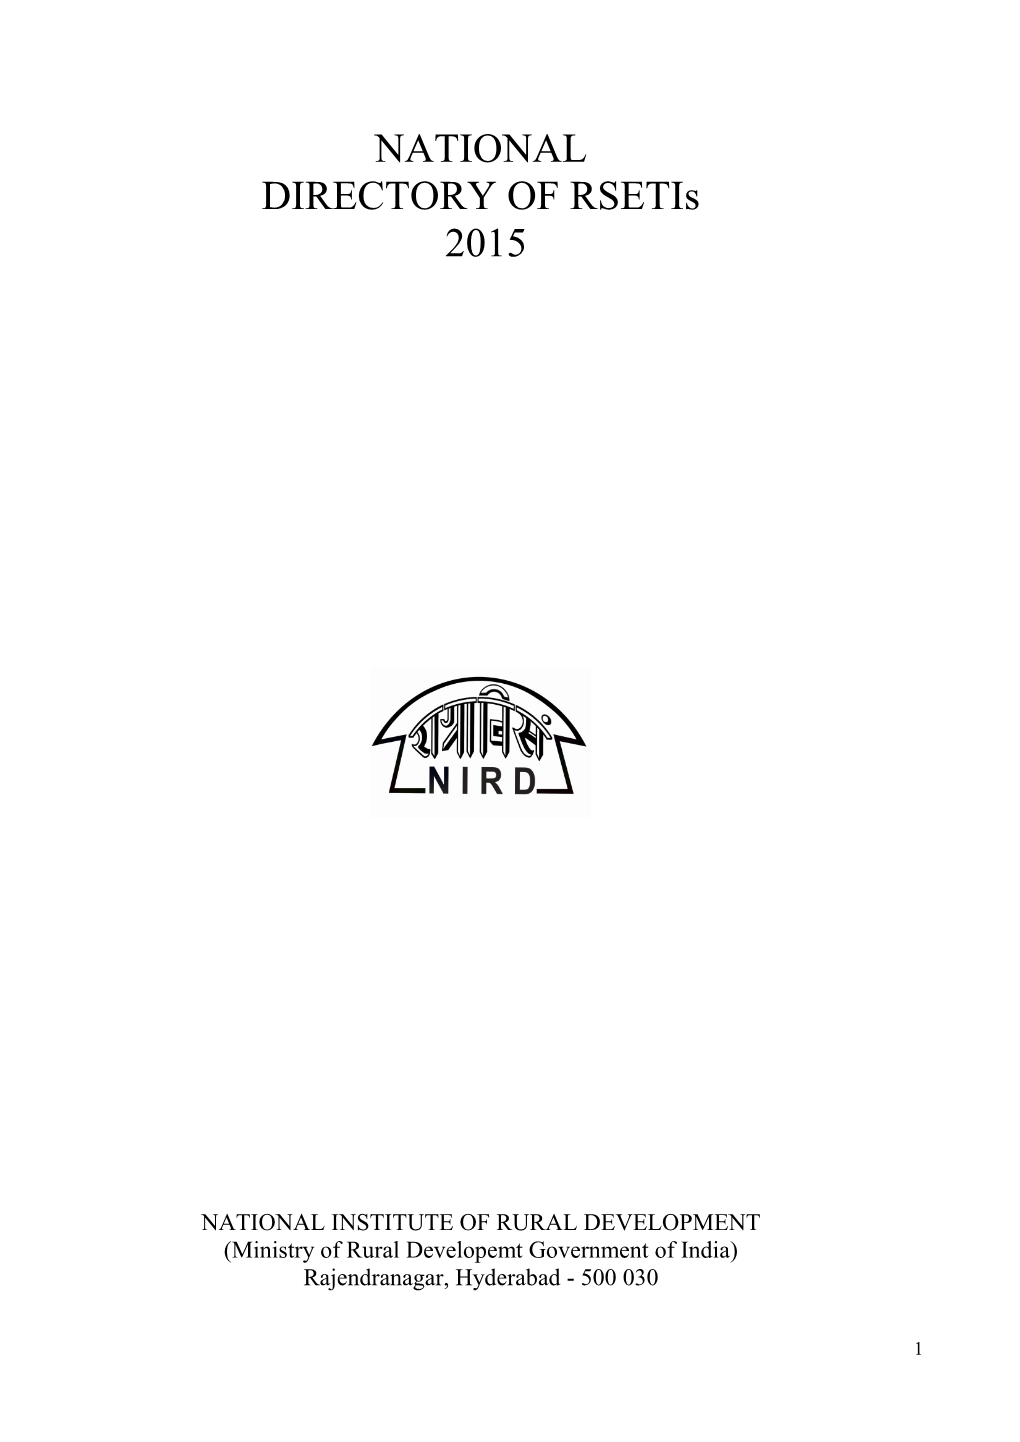 NATIONAL DIRECTORY of Rsetis 2015